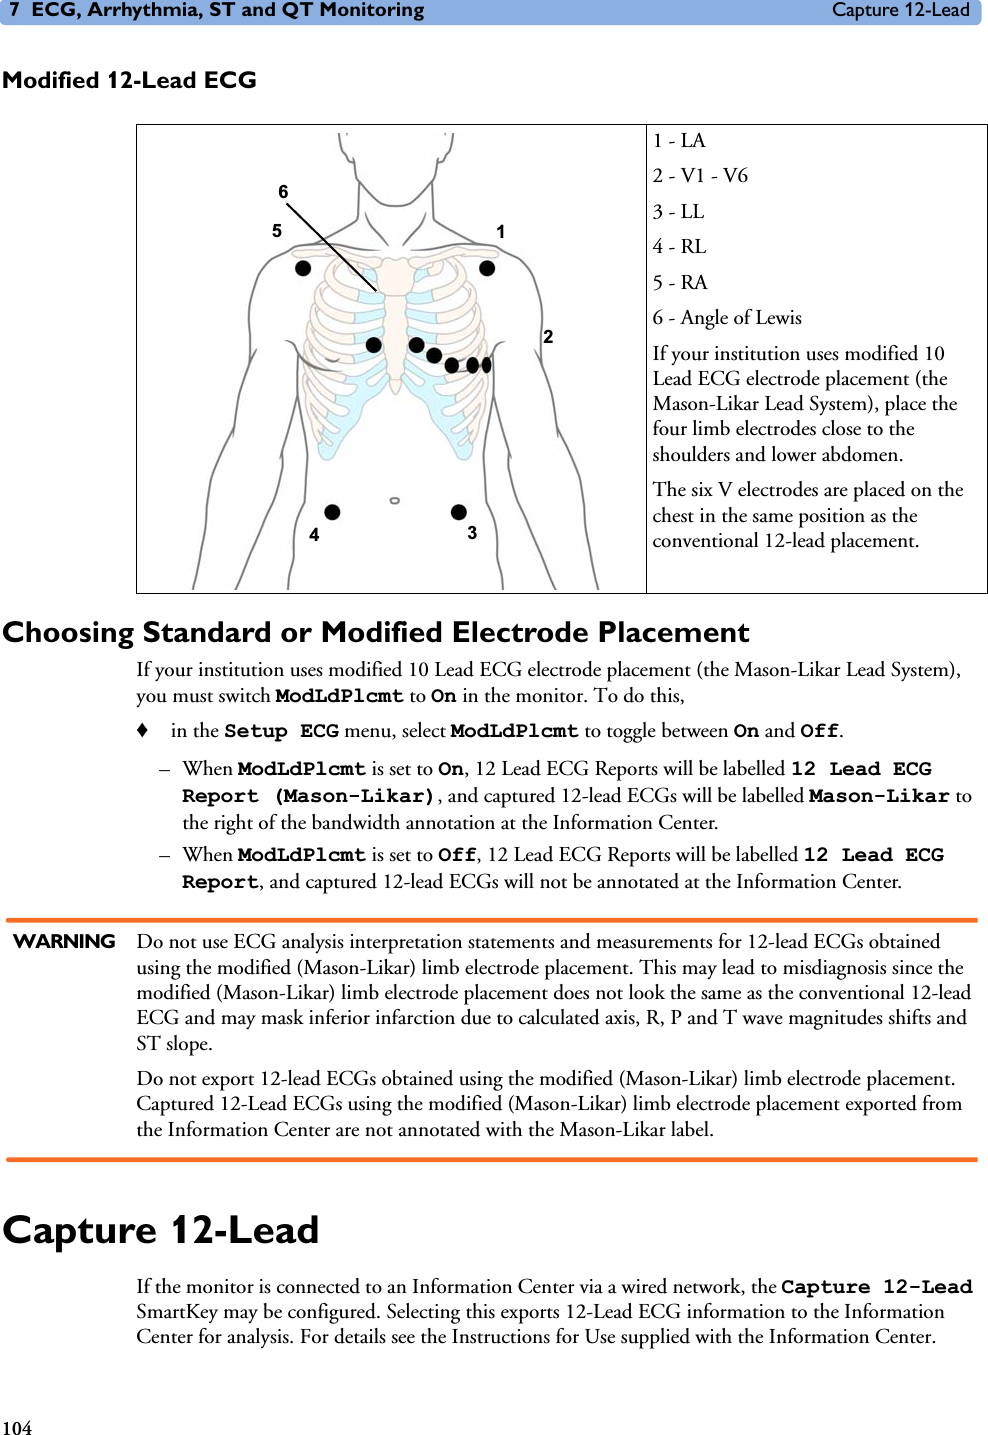 7 ECG, Arrhythmia, ST and QT Monitoring Capture 12-Lead104Modified 12-Lead ECGChoosing Standard or Modified Electrode PlacementIf your institution uses modified 10 Lead ECG electrode placement (the Mason-Likar Lead System), you must switch ModLdPlcmt to On in the monitor. To do this,♦in the Setup ECG menu, select ModLdPlcmt to toggle between On and Off.–When ModLdPlcmt is set to On, 12 Lead ECG Reports will be labelled 12 Lead ECG Report (Mason-Likar), and captured 12-lead ECGs will be labelled Mason-Likar to the right of the bandwidth annotation at the Information Center.–When ModLdPlcmt is set to Off, 12 Lead ECG Reports will be labelled 12 Lead ECG Report, and captured 12-lead ECGs will not be annotated at the Information Center.WARNING Do not use ECG analysis interpretation statements and measurements for 12-lead ECGs obtained using the modified (Mason-Likar) limb electrode placement. This may lead to misdiagnosis since the modified (Mason-Likar) limb electrode placement does not look the same as the conventional 12-lead ECG and may mask inferior infarction due to calculated axis, R, P and T wave magnitudes shifts and ST slope. Do not export 12-lead ECGs obtained using the modified (Mason-Likar) limb electrode placement. Captured 12-Lead ECGs using the modified (Mason-Likar) limb electrode placement exported from the Information Center are not annotated with the Mason-Likar label. Capture 12-LeadIf the monitor is connected to an Information Center via a wired network, the Capture 12-Lead SmartKey may be configured. Selecting this exports 12-Lead ECG information to the Information Center for analysis. For details see the Instructions for Use supplied with the Information Center. 1 - LA2 - V1 - V63 - LL4 - RL5 - RA6 - Angle of LewisIf your institution uses modified 10 Lead ECG electrode placement (the Mason-Likar Lead System), place the four limb electrodes close to the shoulders and lower abdomen.The six V electrodes are placed on the chest in the same position as the conventional 12-lead placement.1 35462